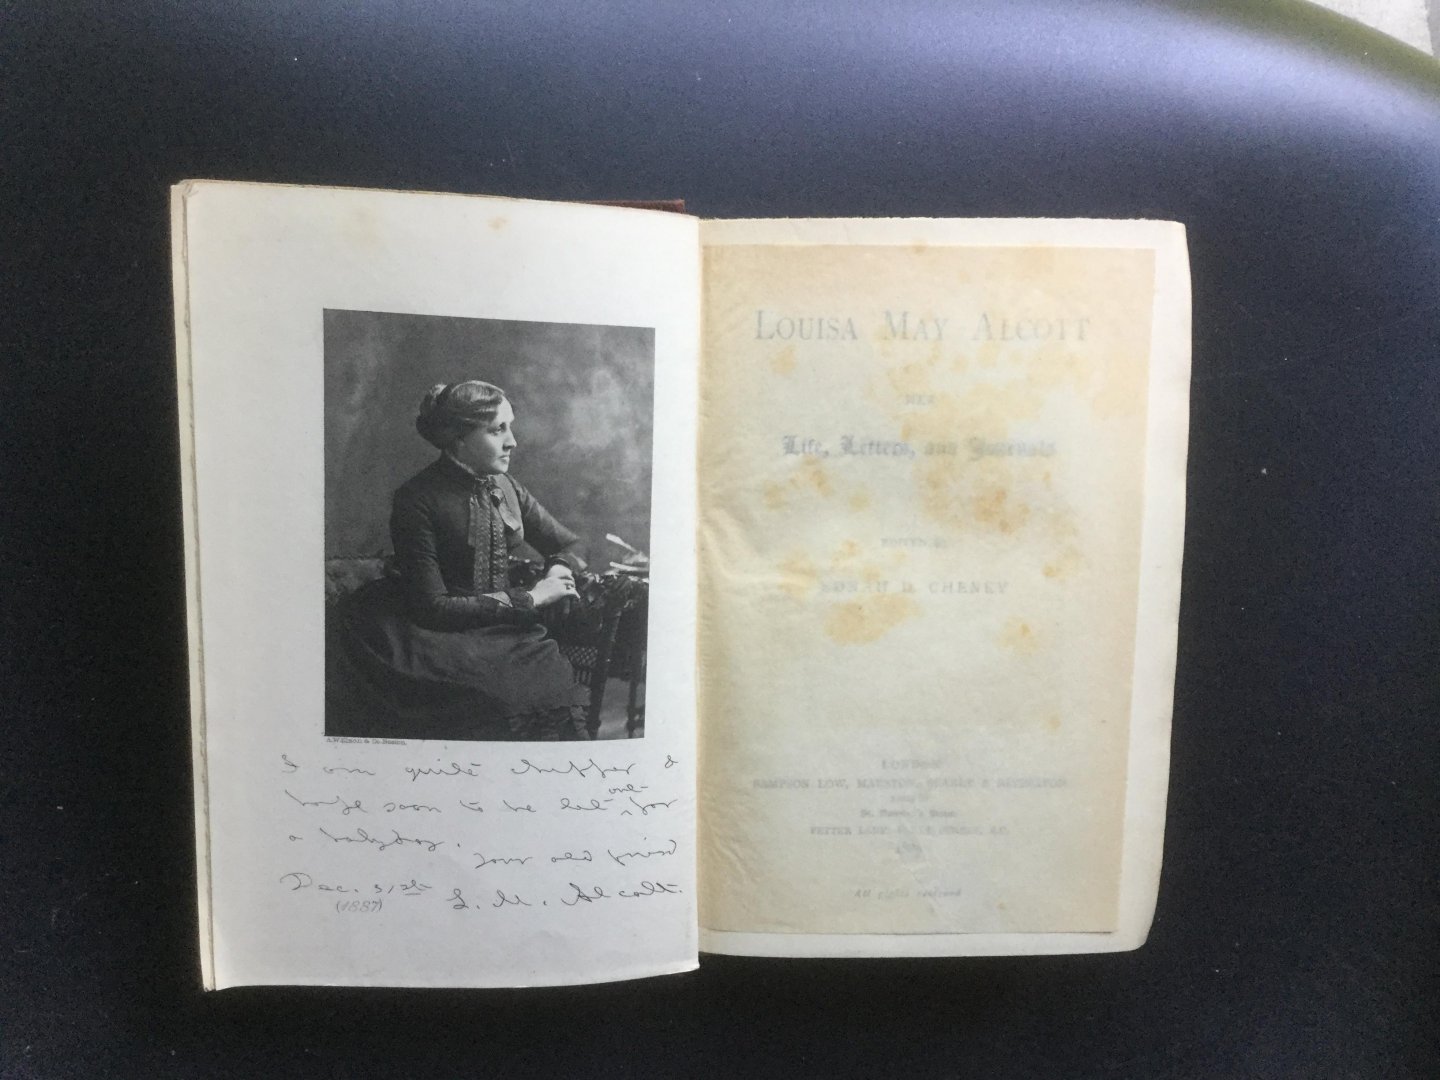 Edited by Ednah D. Cheney - Louisa May Alcott, Her Life, Letters and Journals       . FIRST EDITION, VERY GOOD COPY